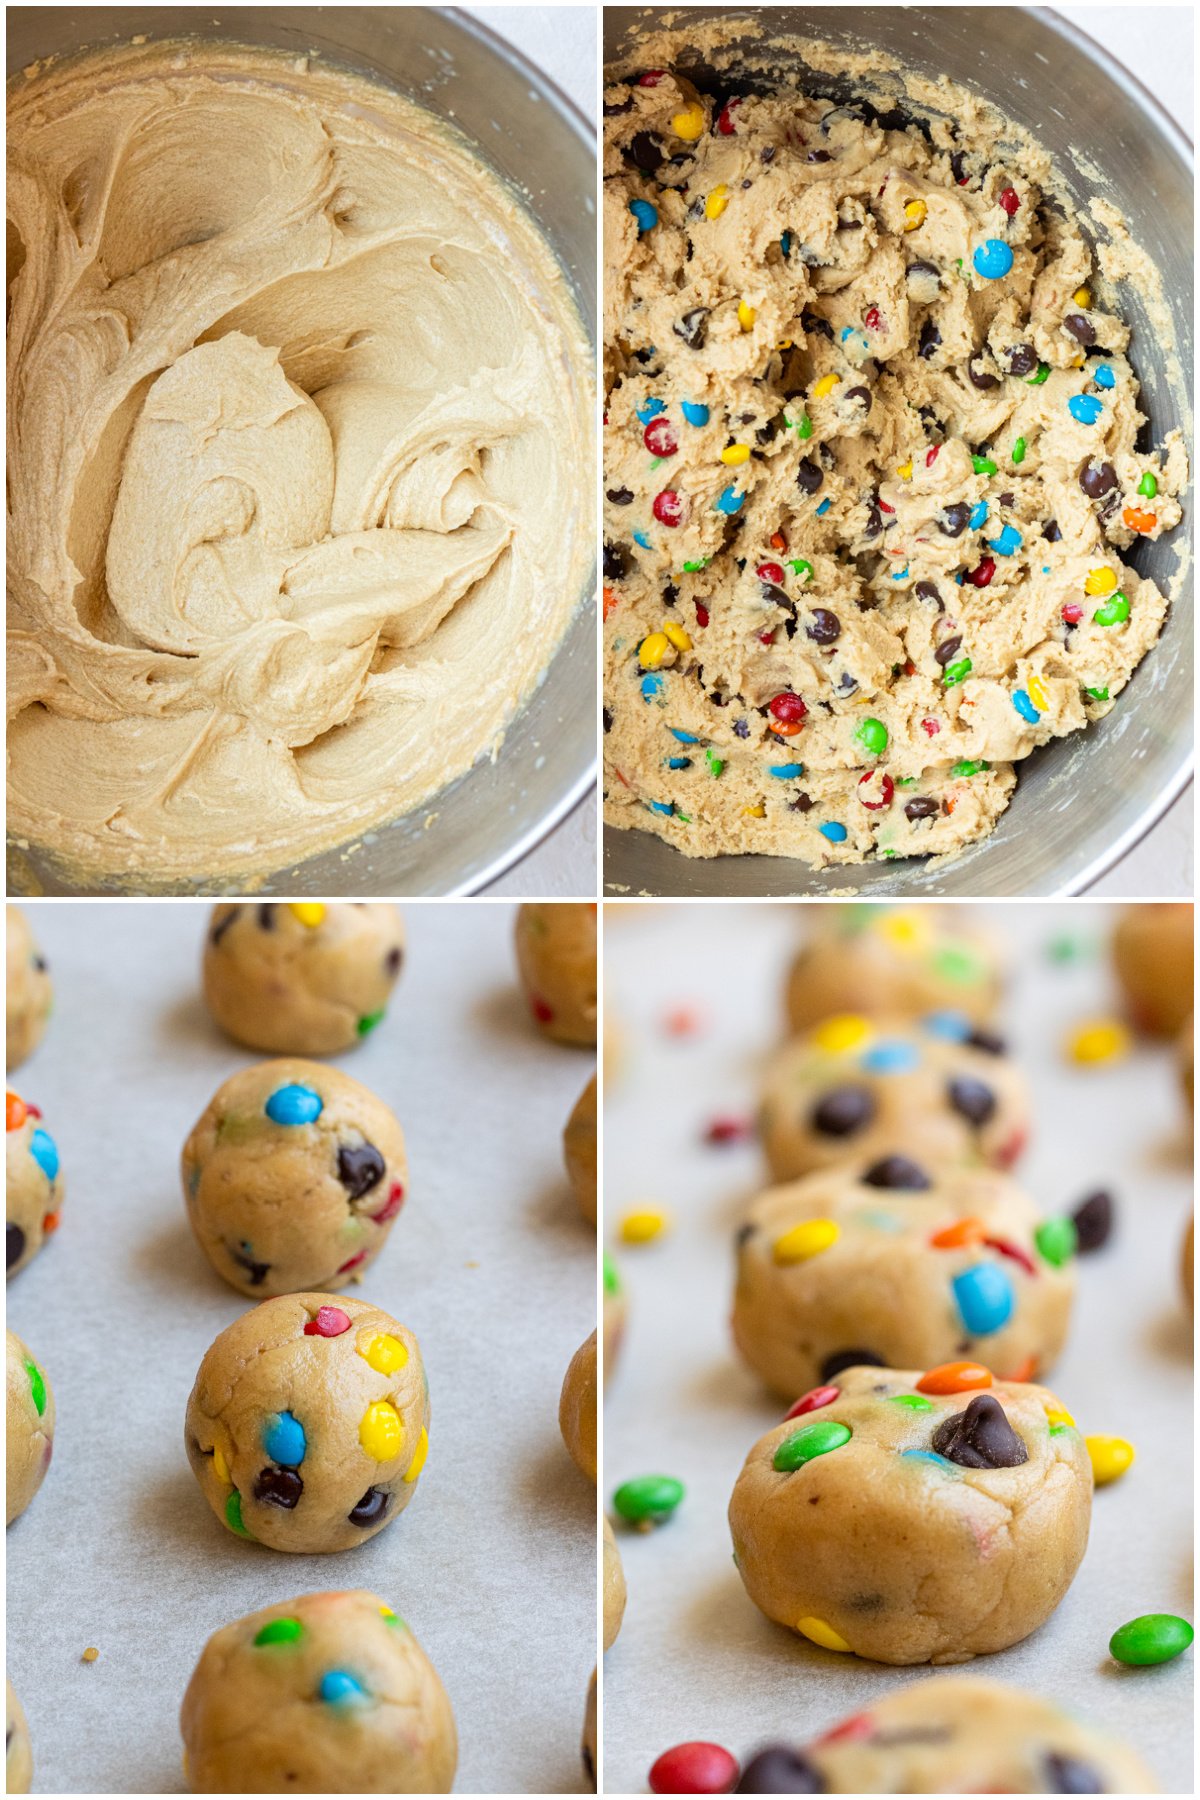 Step by step photos on how to make Chocolate Chip Peanut Butter Cookiese